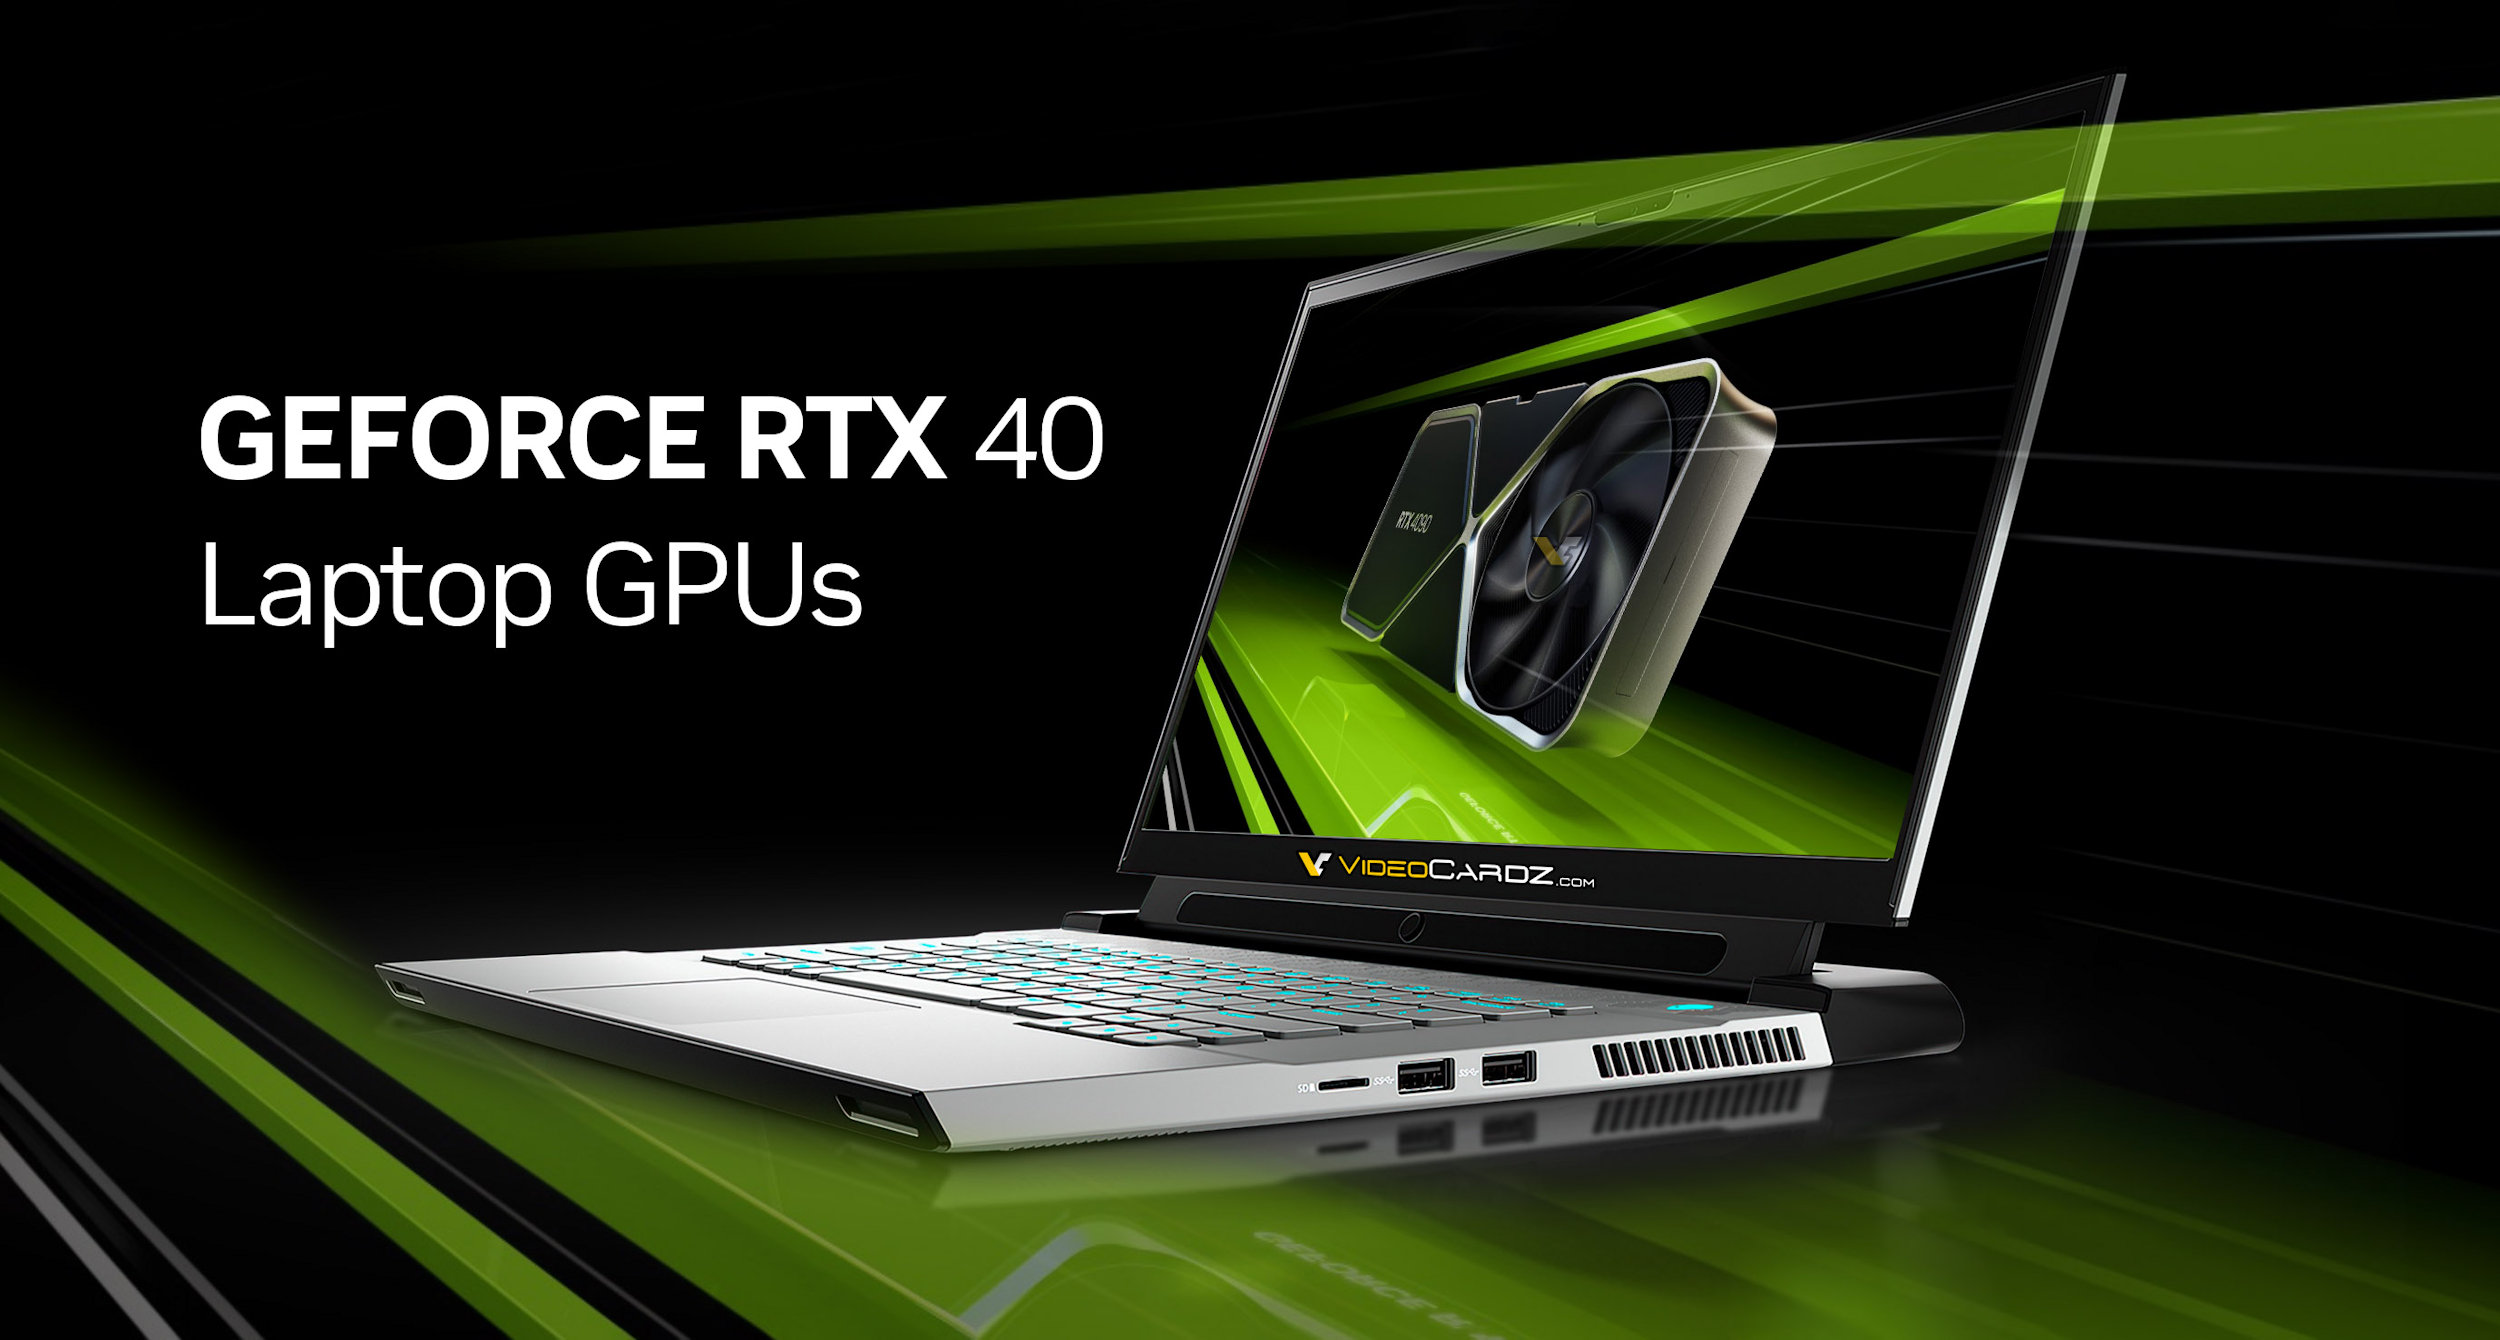 GeForce RTX 40 Series Play Beyond Fast with RTX Bundle Available Now, GeForce News